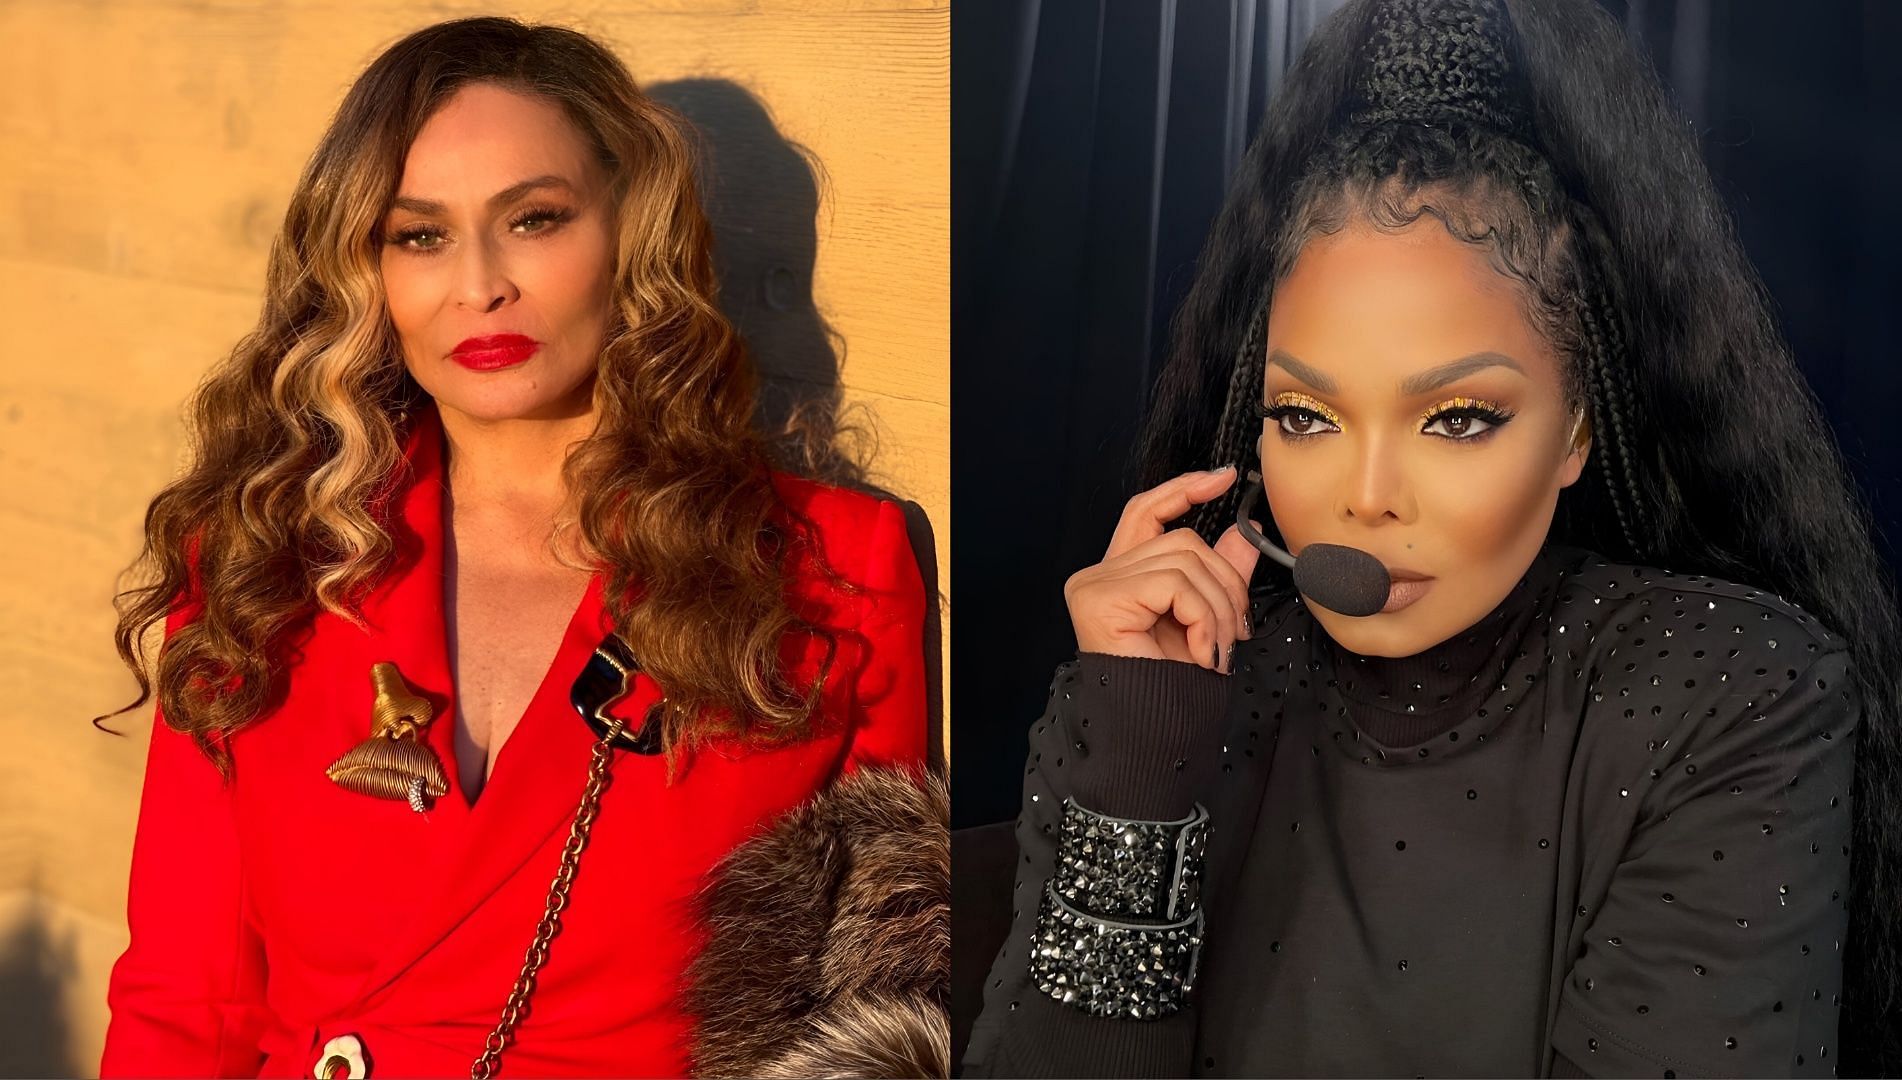 Tina Knowles issues clarification after liking an Instagram post shading Janet Jackson. (Image via Instagram/@mstinaknowles, @janetjackson)